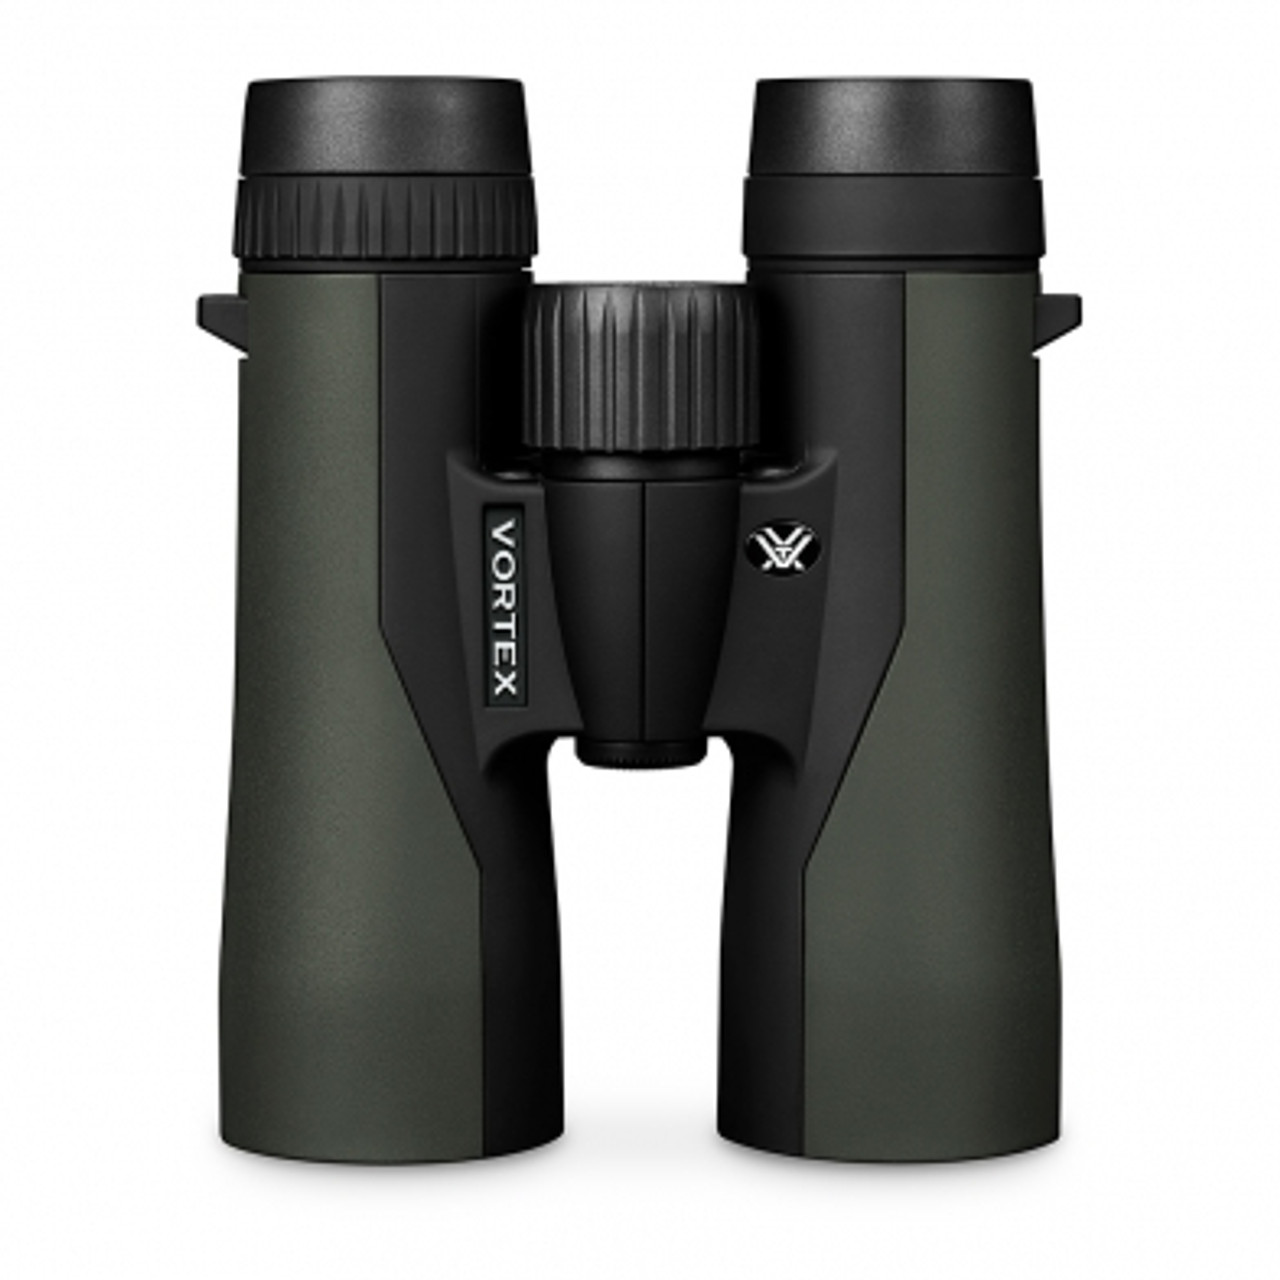 VORTEX CROSSFIRE HD 8X42 BINOCULARS
VT-CF-4311
You know what they say about people who assume you can’t get HD optics, rugged performance and high end form-factor in a value priced binocular? They clearly haven’t seen the Crossfire HD! The included GlassPak binocular harness allows for quick optic deployment along with superior protection and comfort. The Crossfire HD is a rare find in entry-level optics.



SKU	VT-CF-4311
Magnification	8 x
Objective Lens Diameter	42 mm
Eye Relief	17 mm
Exit Pupil	 5.25 mm
Linear Field of View	393 feet/1000 yards
Angular Field of View	7.5 degrees
Close Focus	6.0 feet
Interpupillary Distance	58 – 75 mm
Height	6.25 inches
Width	5.2 inches
Weight	23.8 ounces

Included in the Box
GlassPak binocular case
GlassPak case harness
Rainguard eyepiece cover
Tethered objective lens covers
Comfort neck strap
Lens cloth

 
VIP Unconditional Lifetime Warranty
OPTICAL FEATURES
HD Optical System	Optimized with select glass elements to deliver exceptional resolution, cut chromatic aberration and provide outstanding color fidelity, edge-to-edge sharpness and light transmission.
Fully Multi-Coated	Increase light transmission with multiple anti-reflective coatings on all air-to-glass surfaces.
CONSTRUCTION FEATURES
Rubber Armor	Provides a secure, non-slip grip, and durable external protection.
Waterproof	O-ring seals prevent moisture, dust and debris from penetrating the binocular for reliable performance in all environments.
Shockproof	Rugged construction withstands recoil and impact.
Fogproof	Nitrogen gas purging prevents internal fogging over a wide range of temperatures.
Roof Prism	Valued for greater durability and a more compact size.
CONVENIENCE FEATURES
Adjustable Eyecups	Twist up and down to precise, intermediate settings to maximize custom fit for comfortable viewing with or without eyeglasses.
Centre Focus Wheel	Adjusts the focus of both binocular barrels at the same time.
Diopter	Adjusts for differences in a user's eyes. Located on right eyepiece.
Tripod Adaptable	Compatible with a tripod adapter, allowing use on a tripod or car window mount.